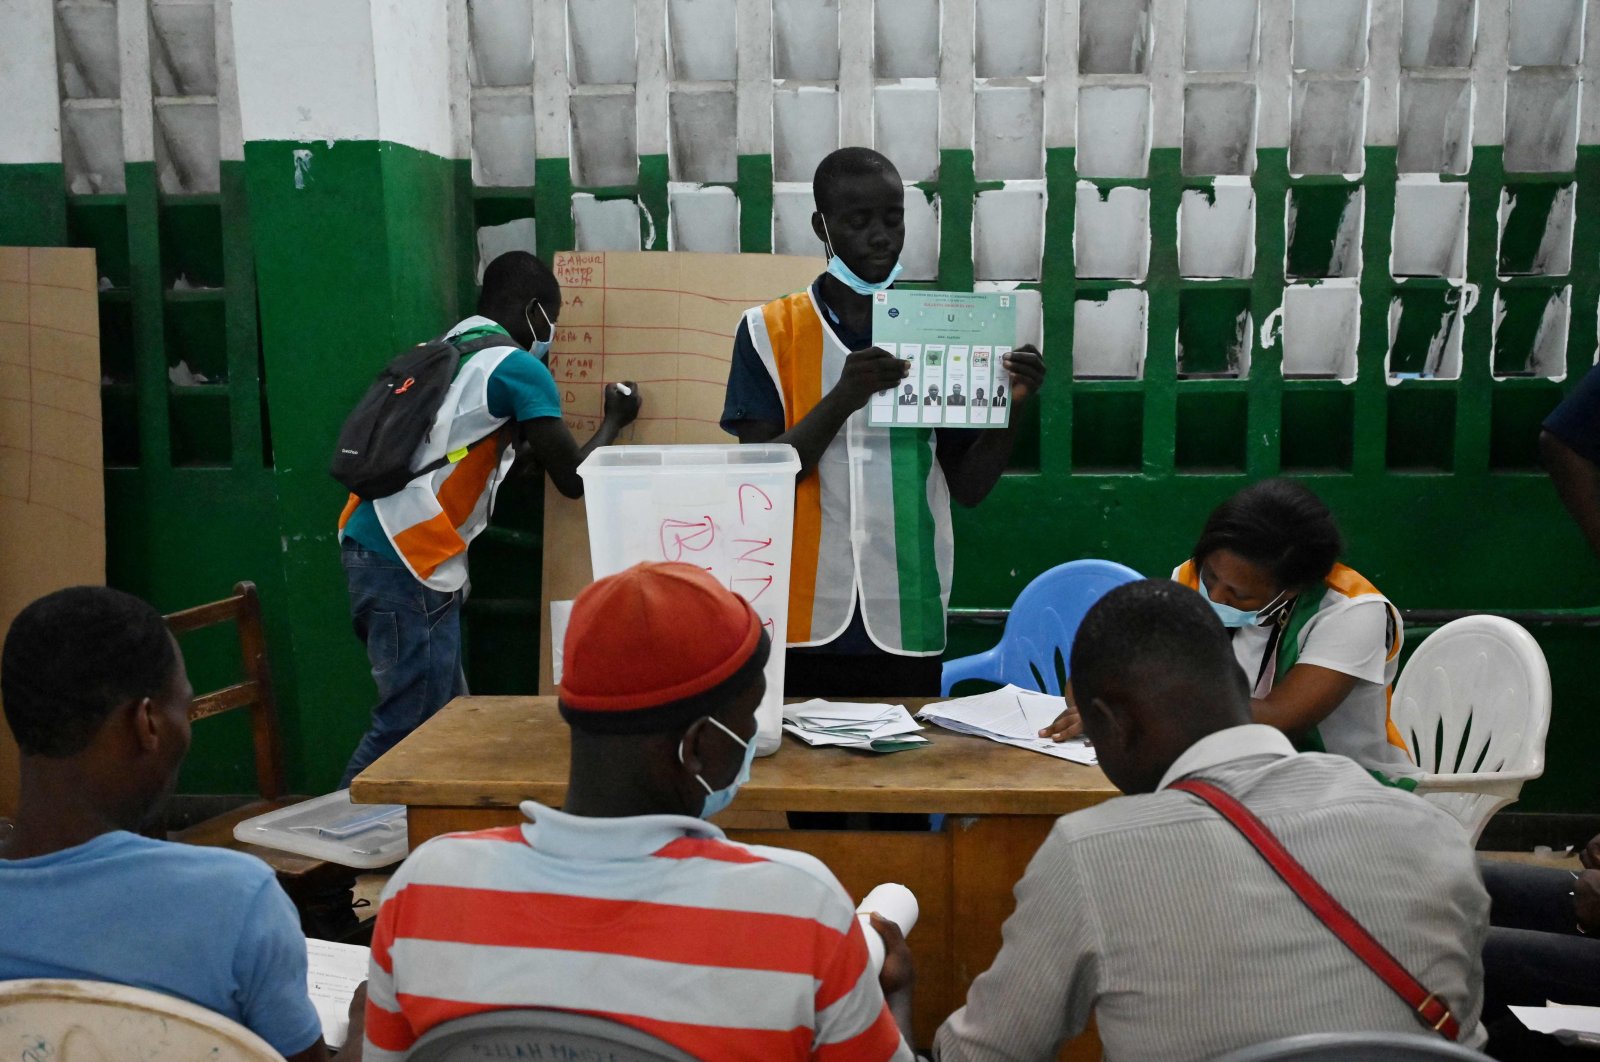 Both sides claim victory in the election to the Ivory Coast